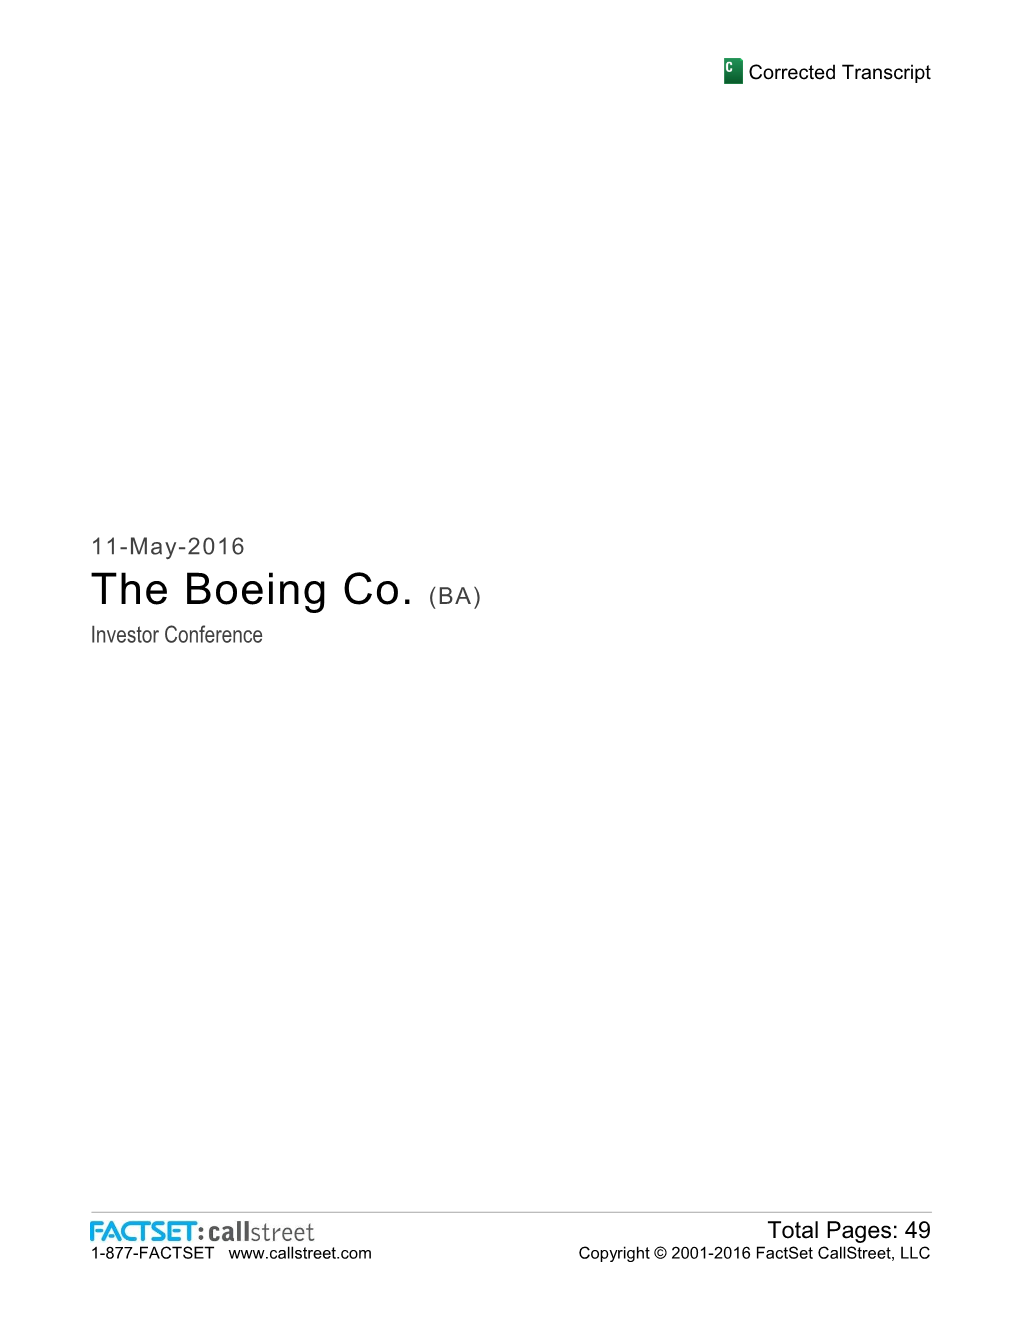 The Boeing Co. (BA) Investor Conference